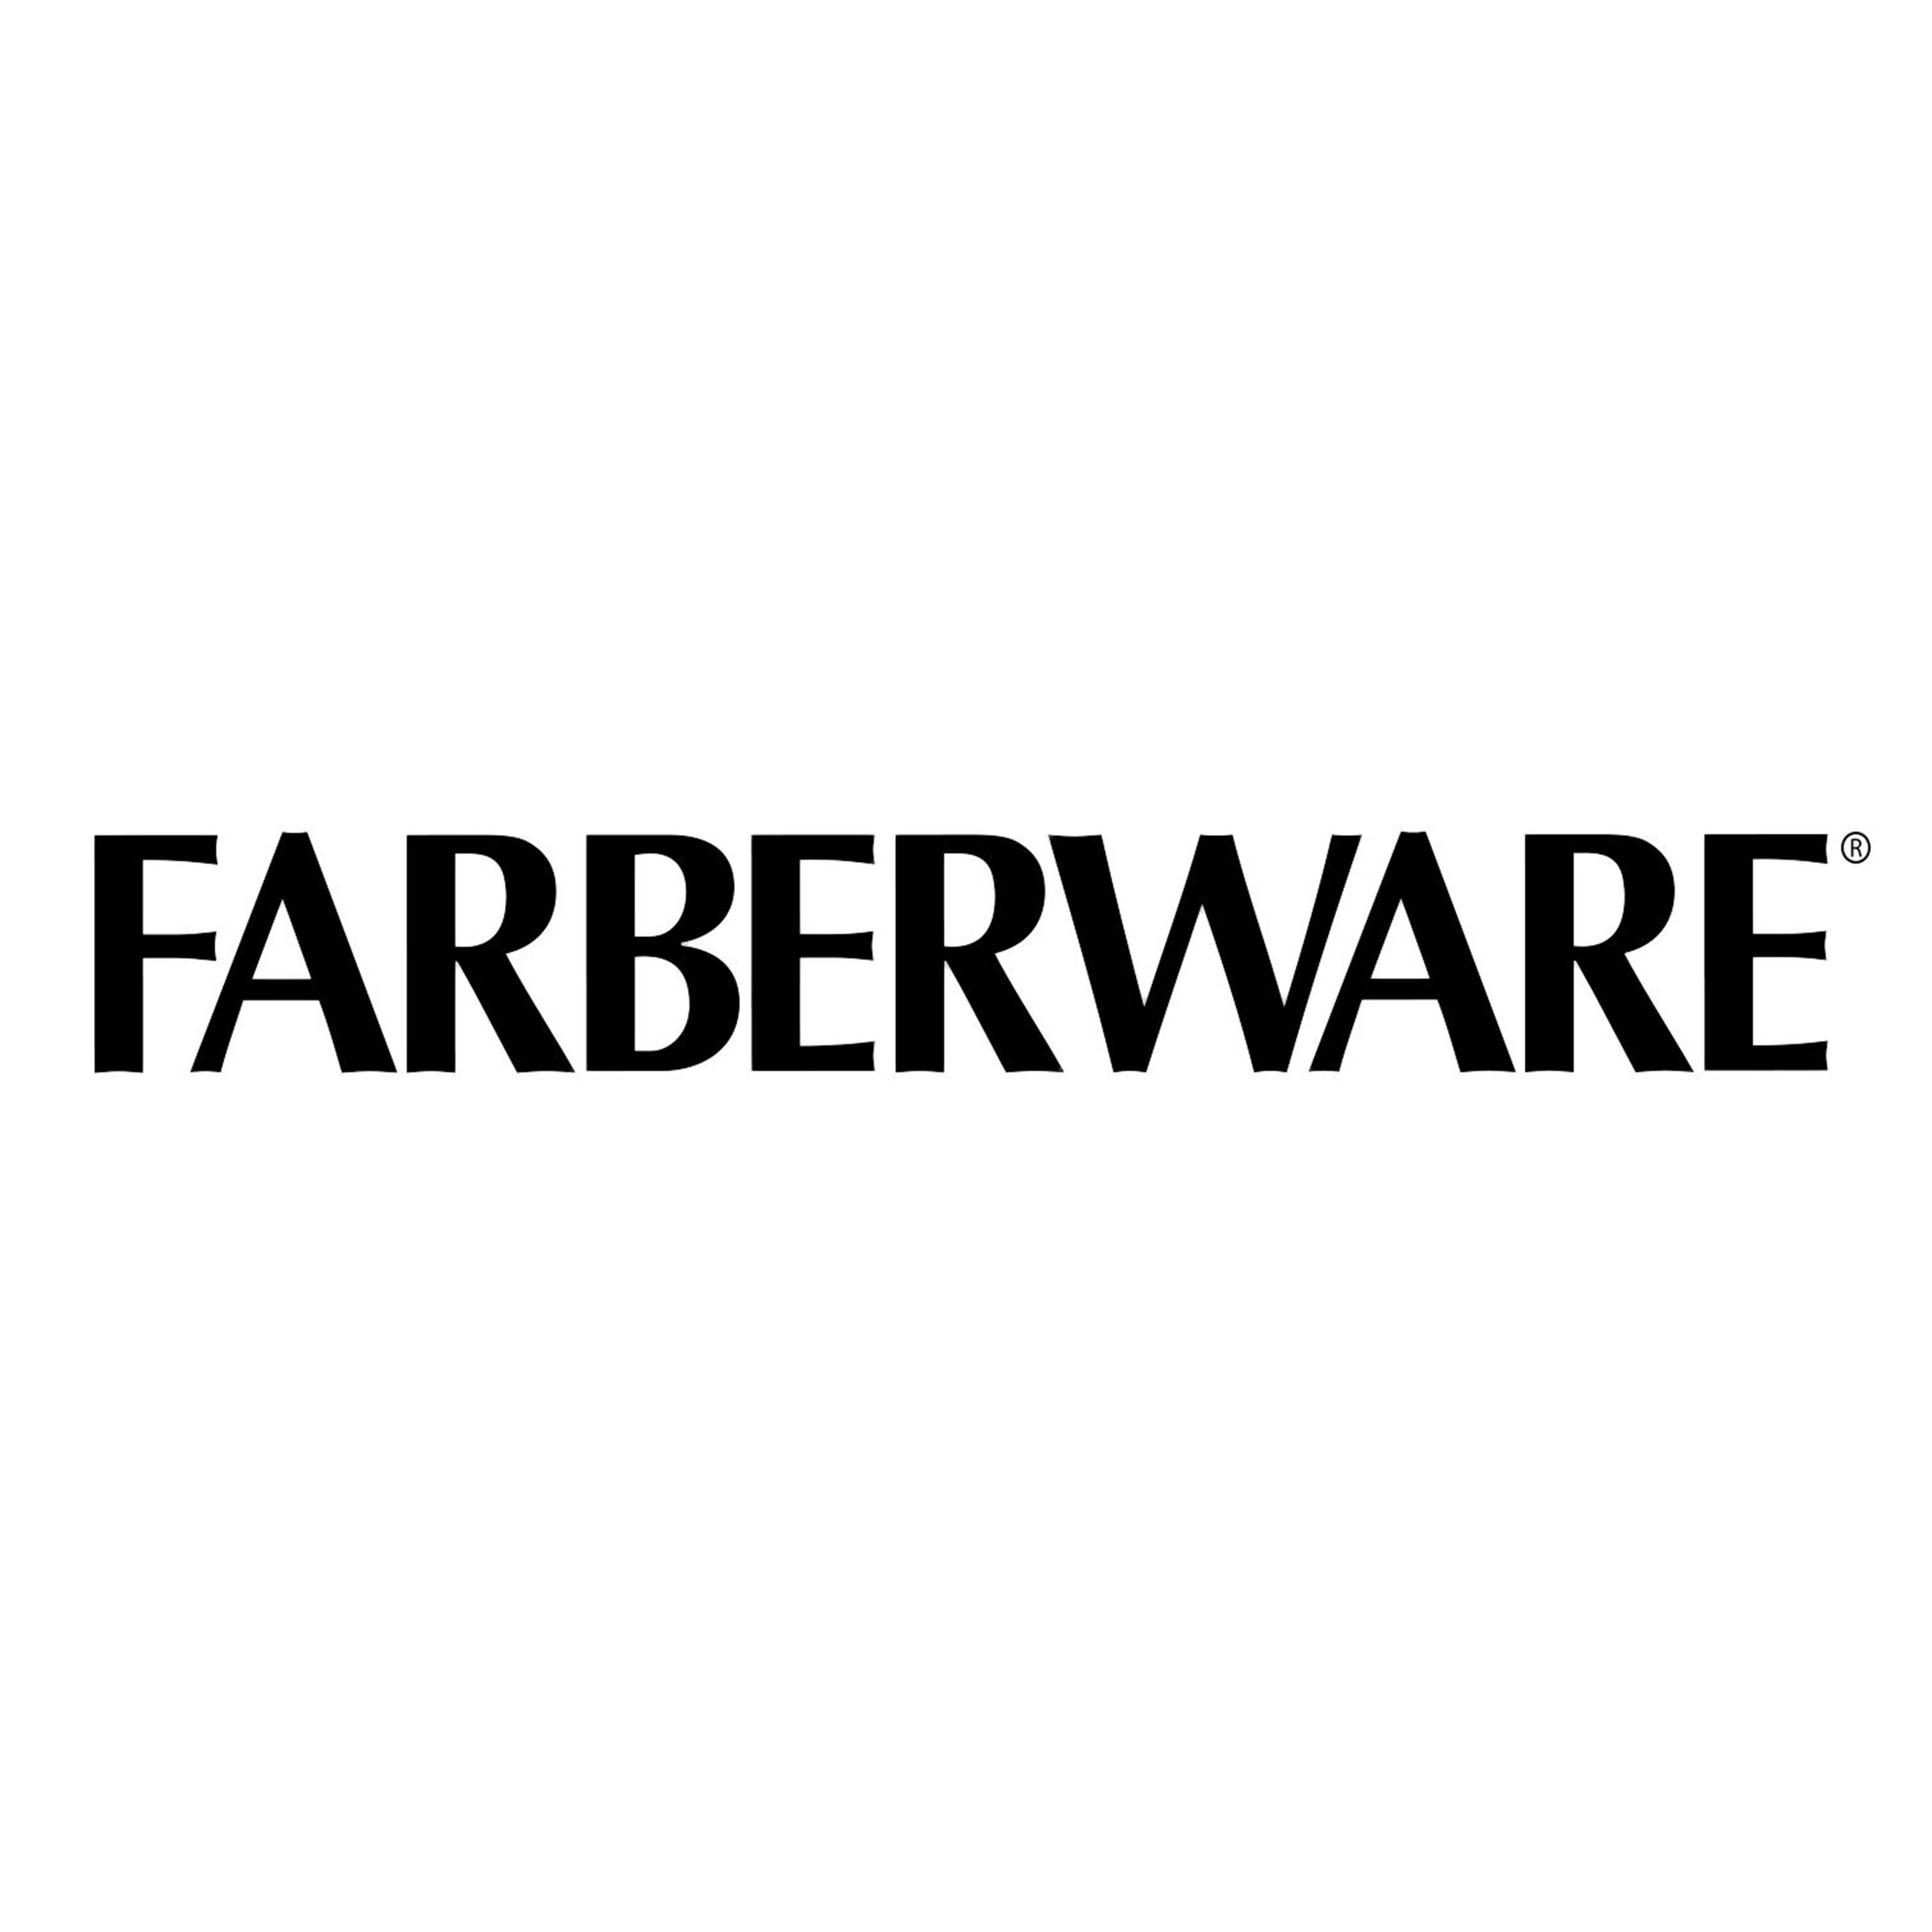 Farberware 22-Piece Never Needs Sharpening Stainless Steel Knife Set with Block Black - image 4 of 6